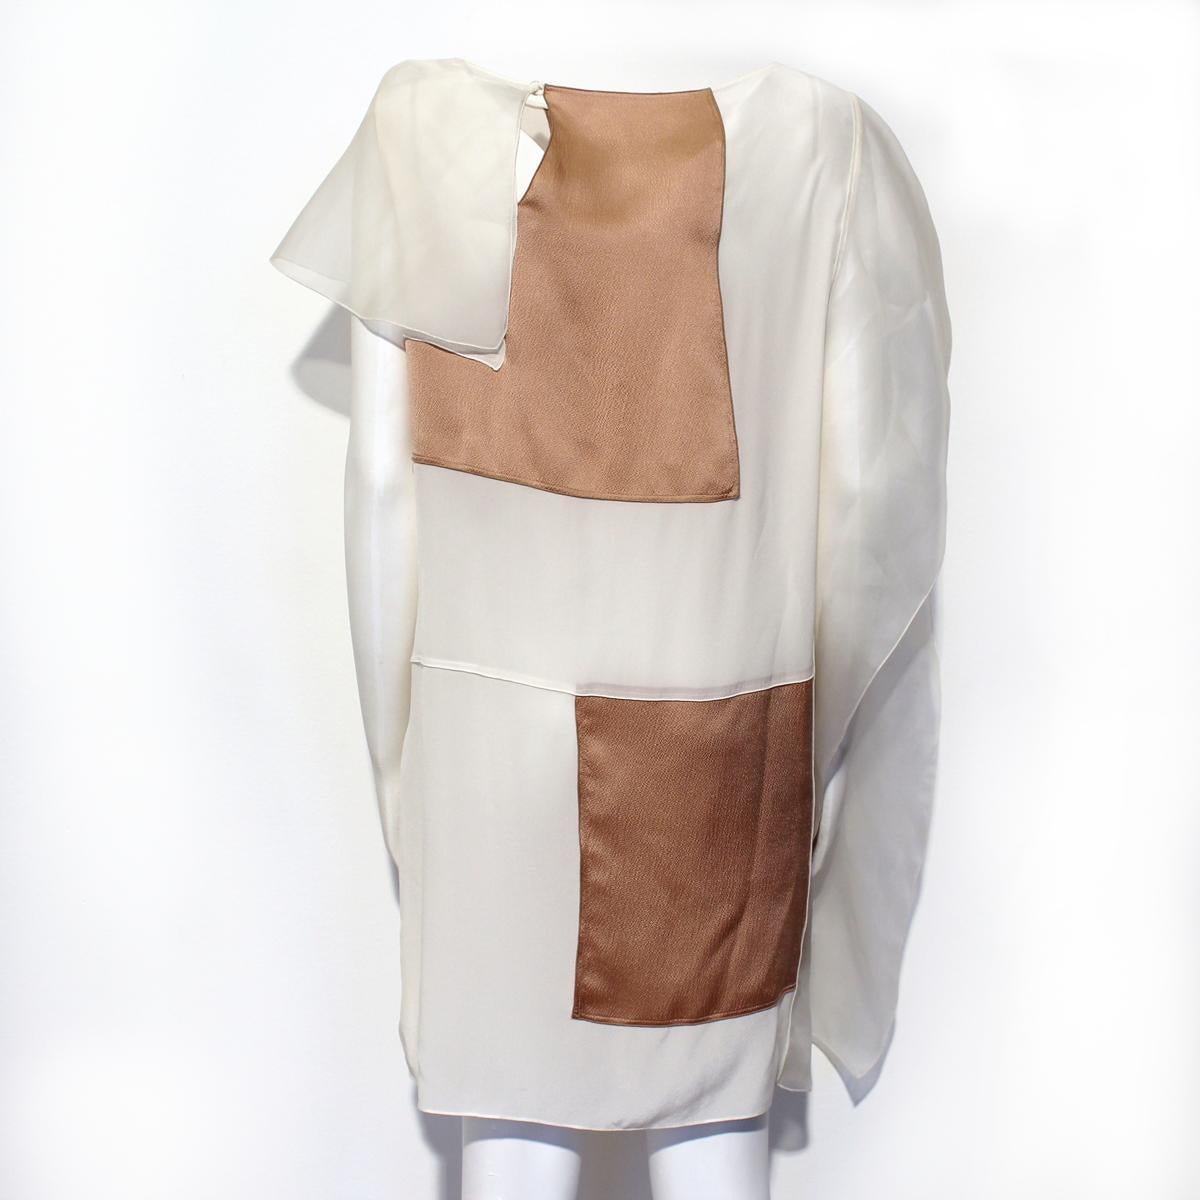 Super chic Vionnet Paris dress
Silk
Sleeveless
Voile on right 
White cream and powder pink
Total lenght (shoulder/hem) cm 85 (33.4 inches)
Original price € 1200
Worldwide express shipping included in the price !